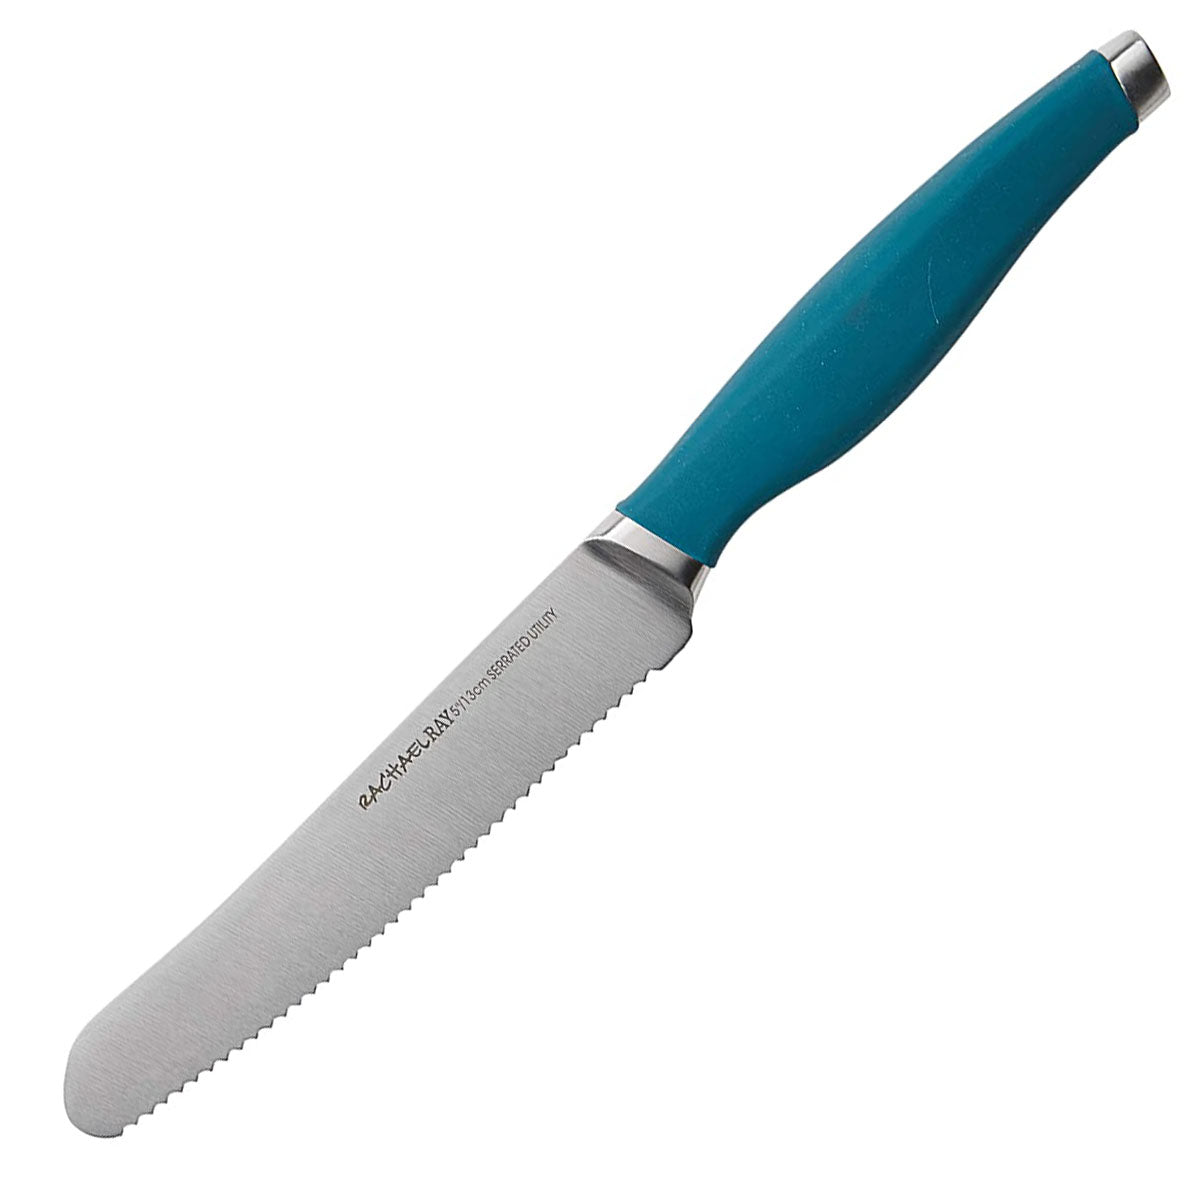 Rachael Ray 2pc Stainless Steel Utility Knife Set Teal